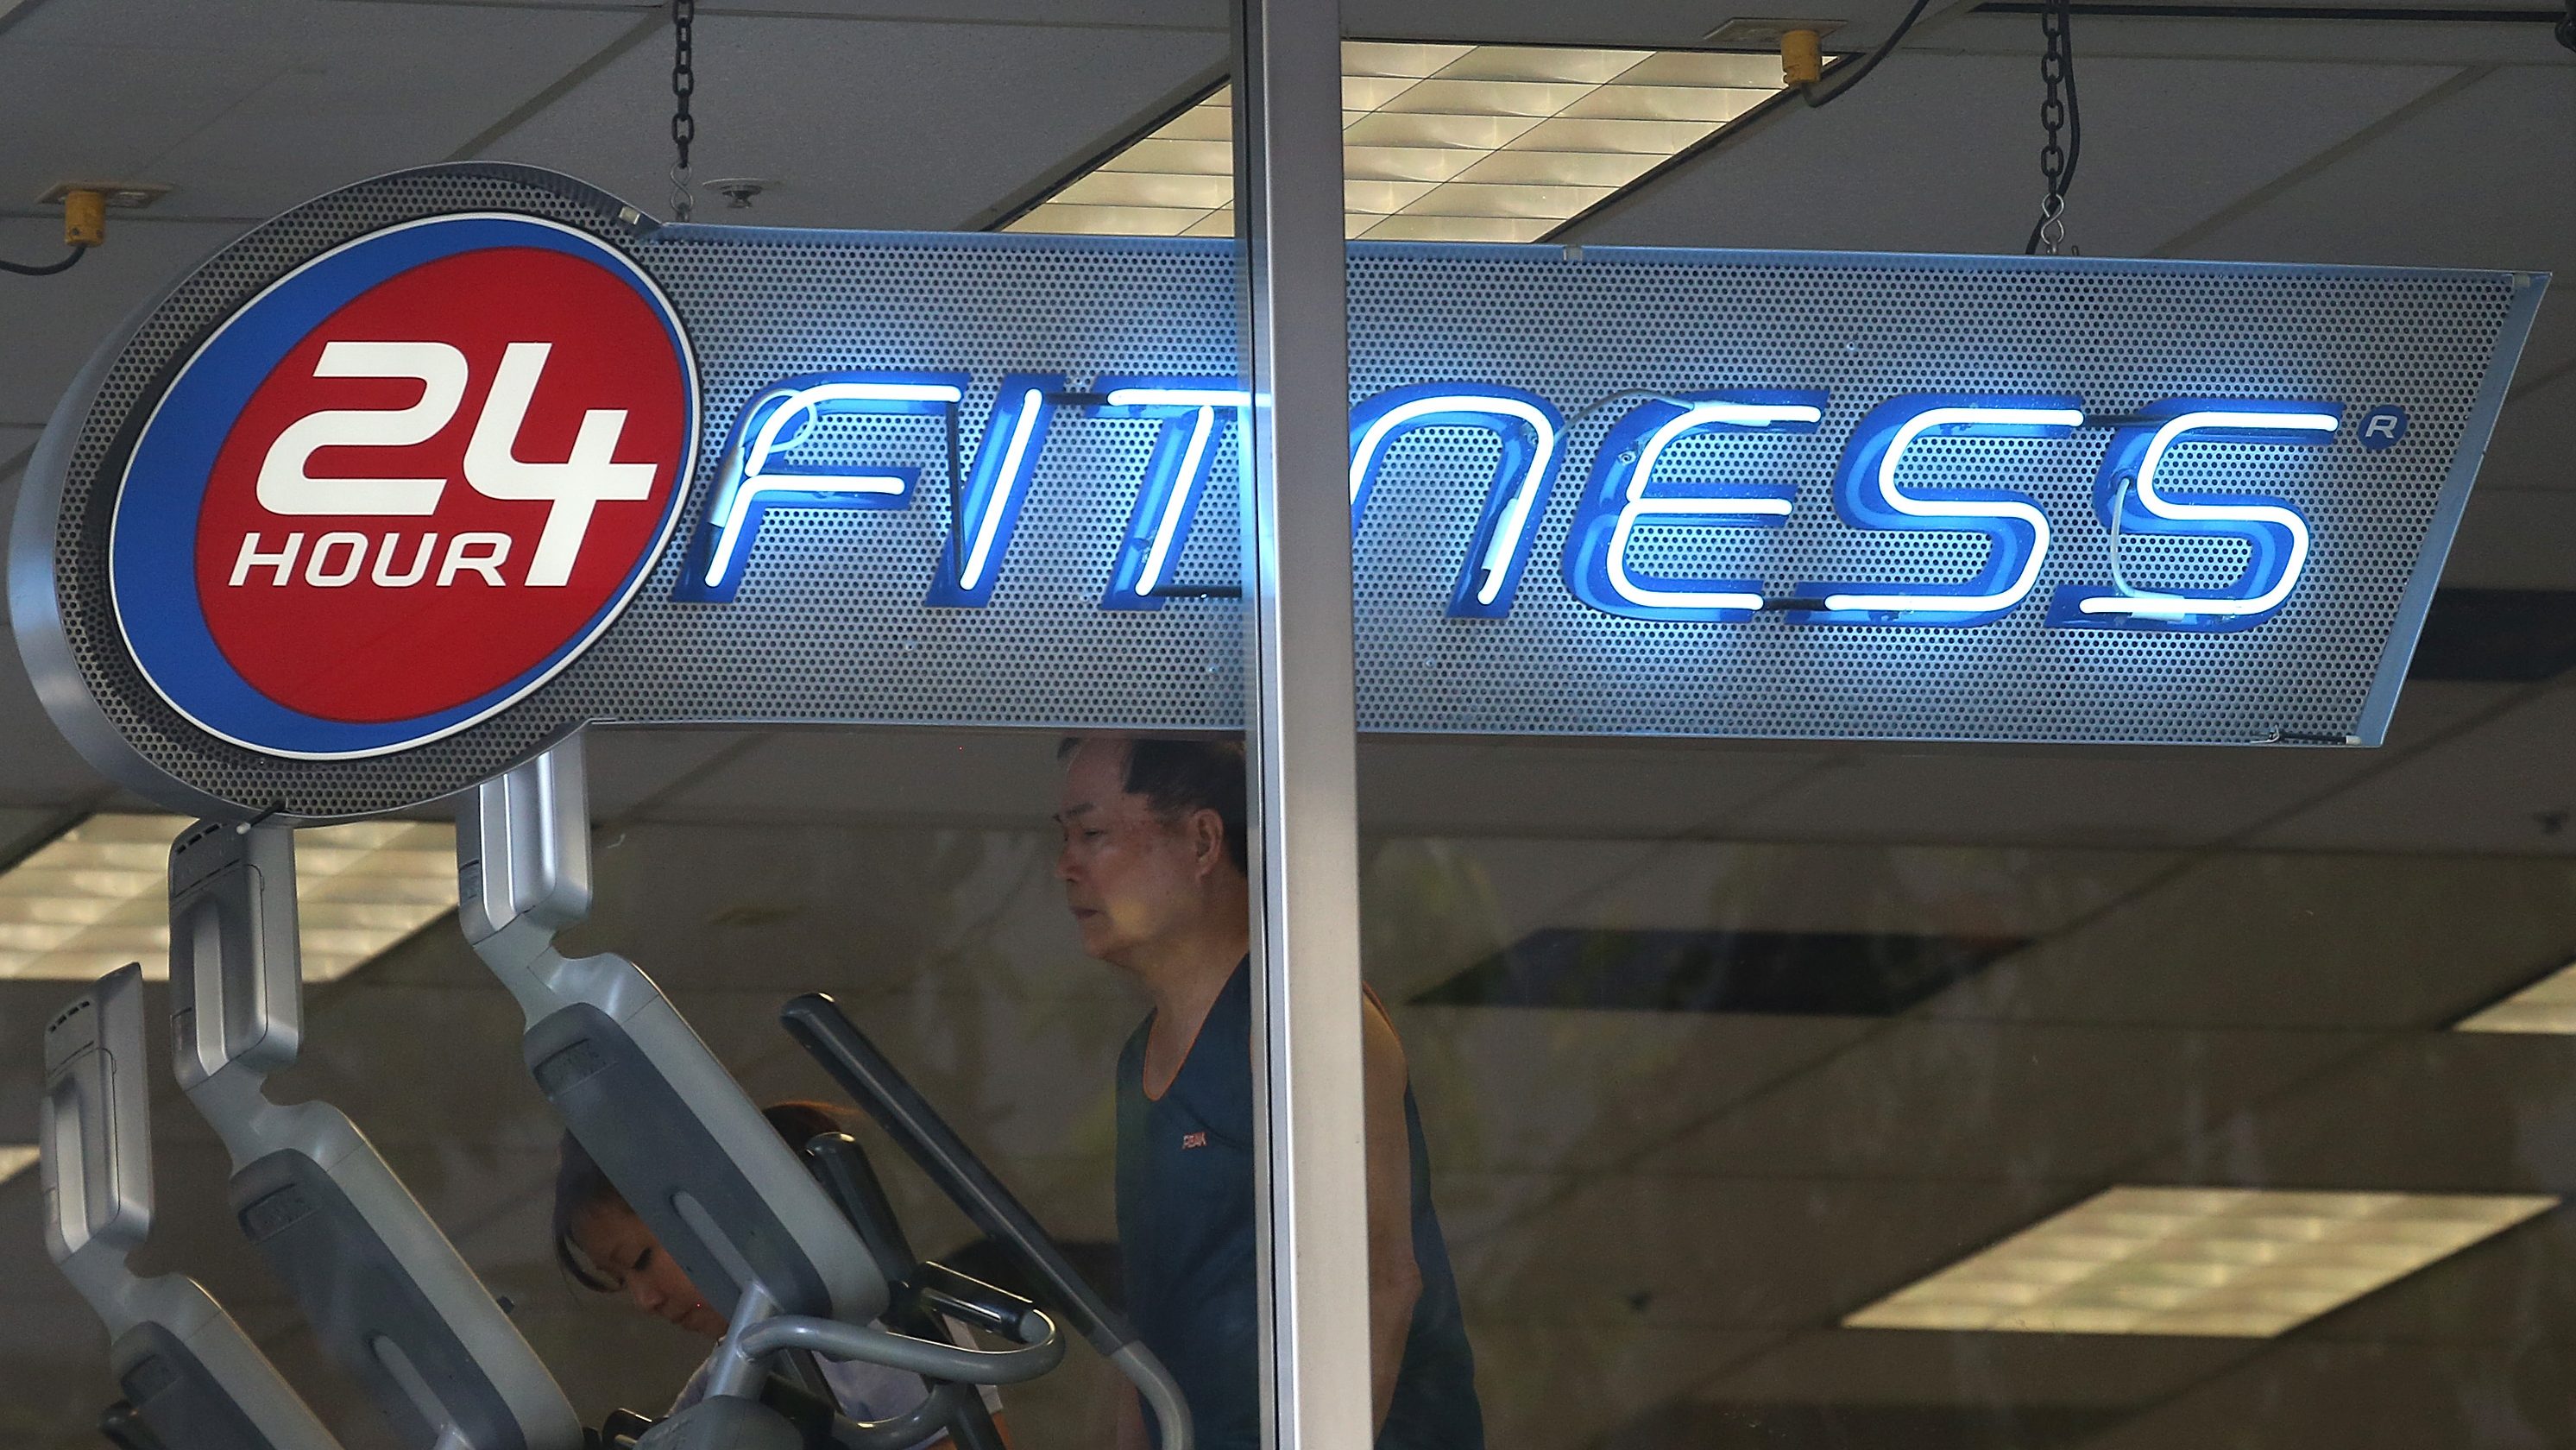 24 Hour Fitness: Which Gyms Are Closing? [FULL LIST] | Heavy.com